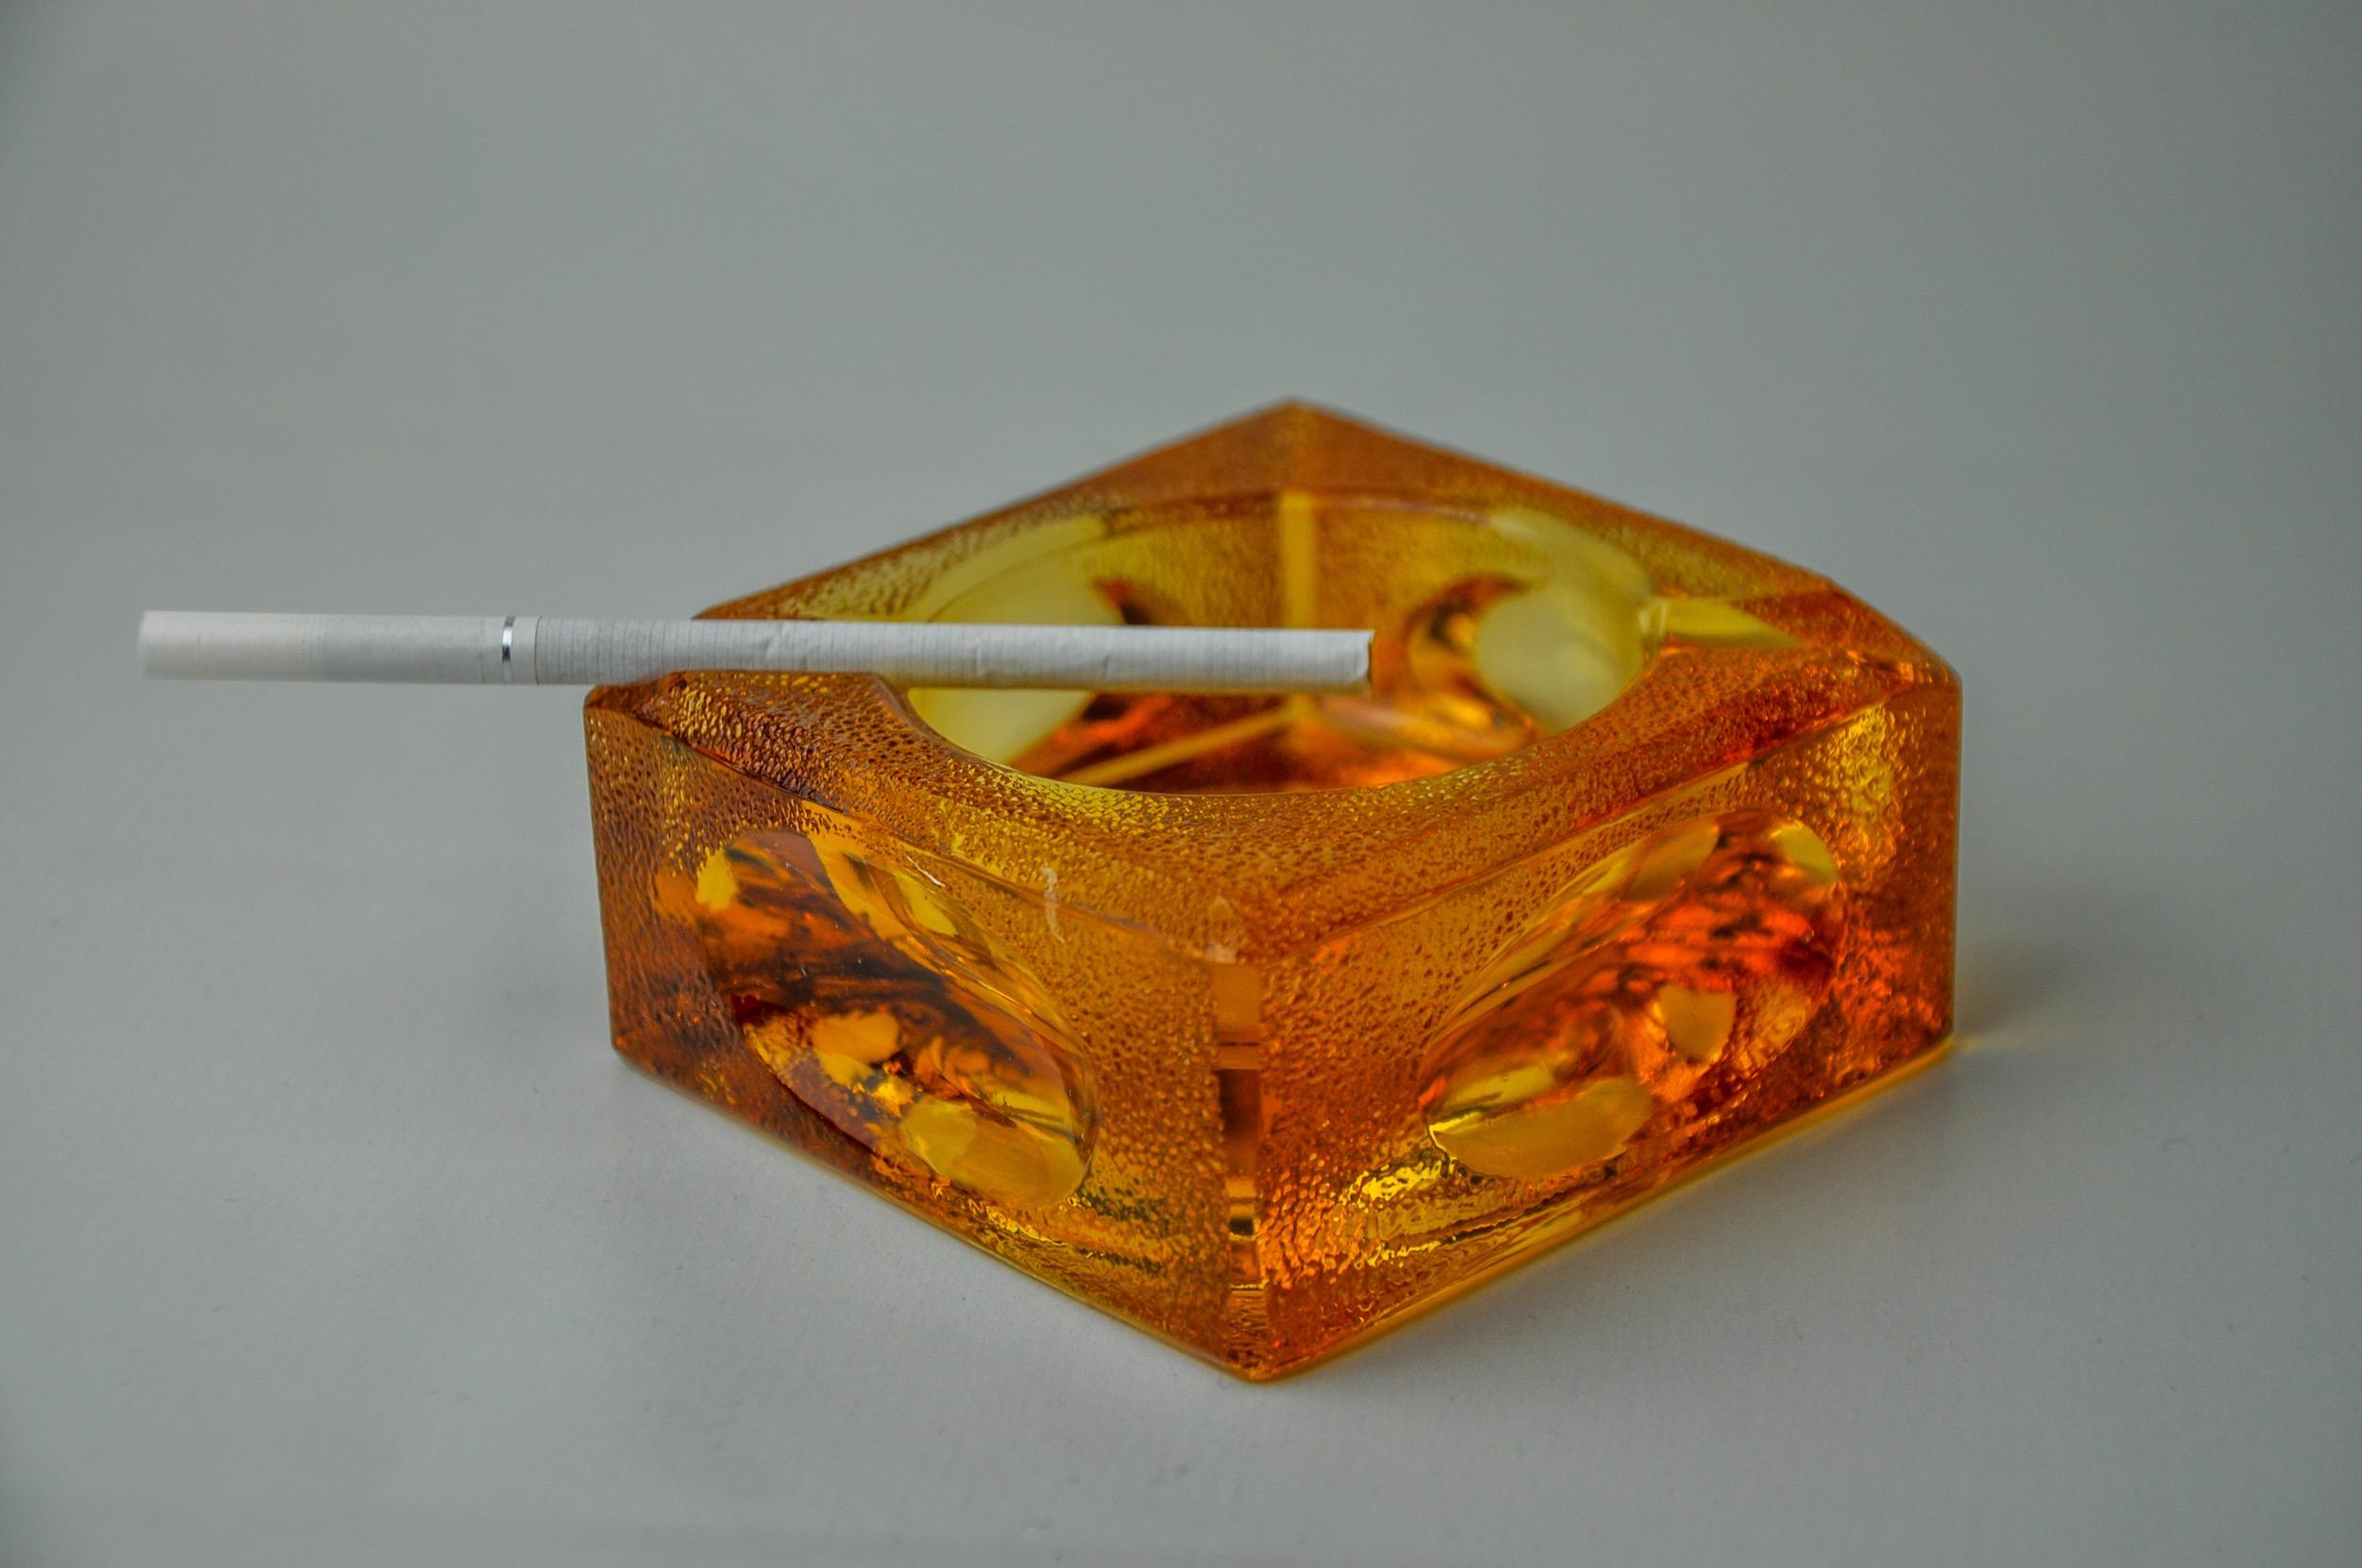 Superb and rare orange magnifying ashtray designed and produced by antonio imperatore in italy in the 1970s. Ashtray in square frosted murano glass with a magnifying effect on its corners, handcrafted by venetian master glassmakers. Decorative